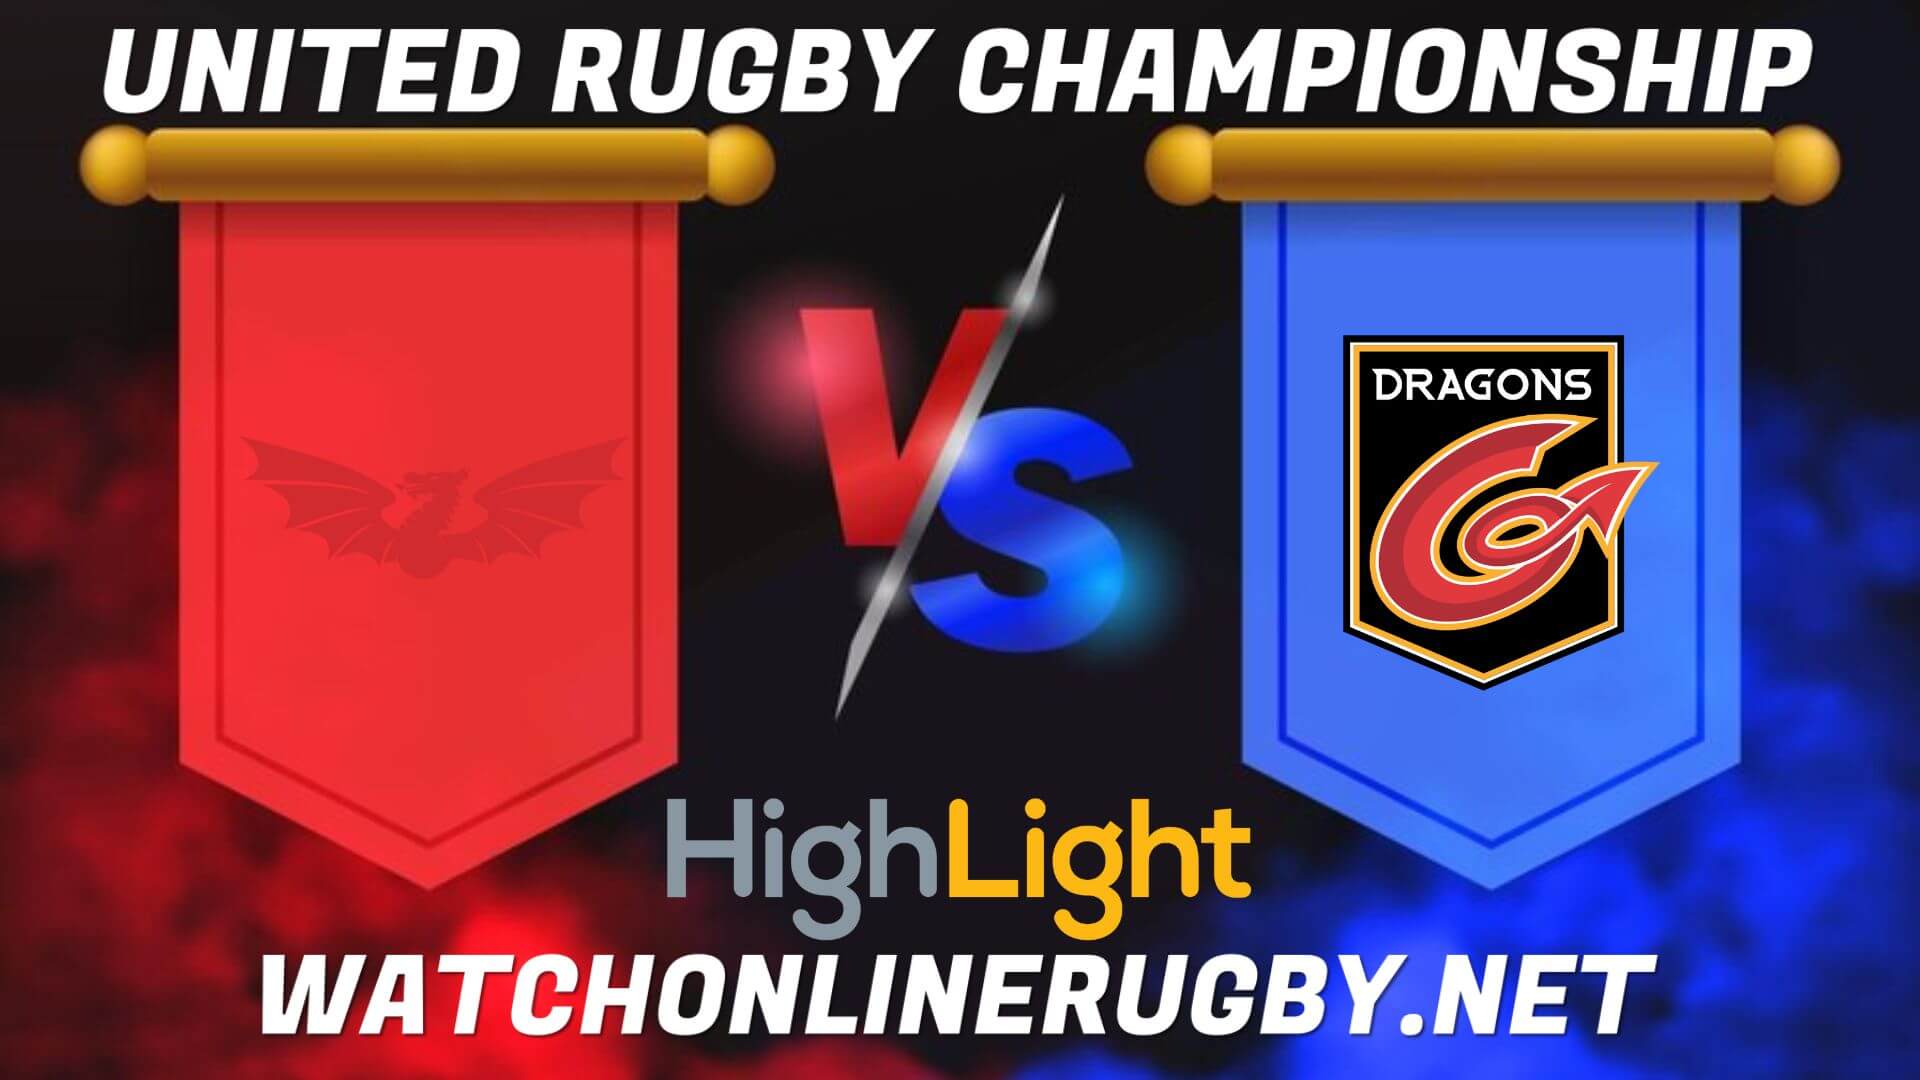 Scarlets Vs Dragons United Rugby Championship 2022 RD 10